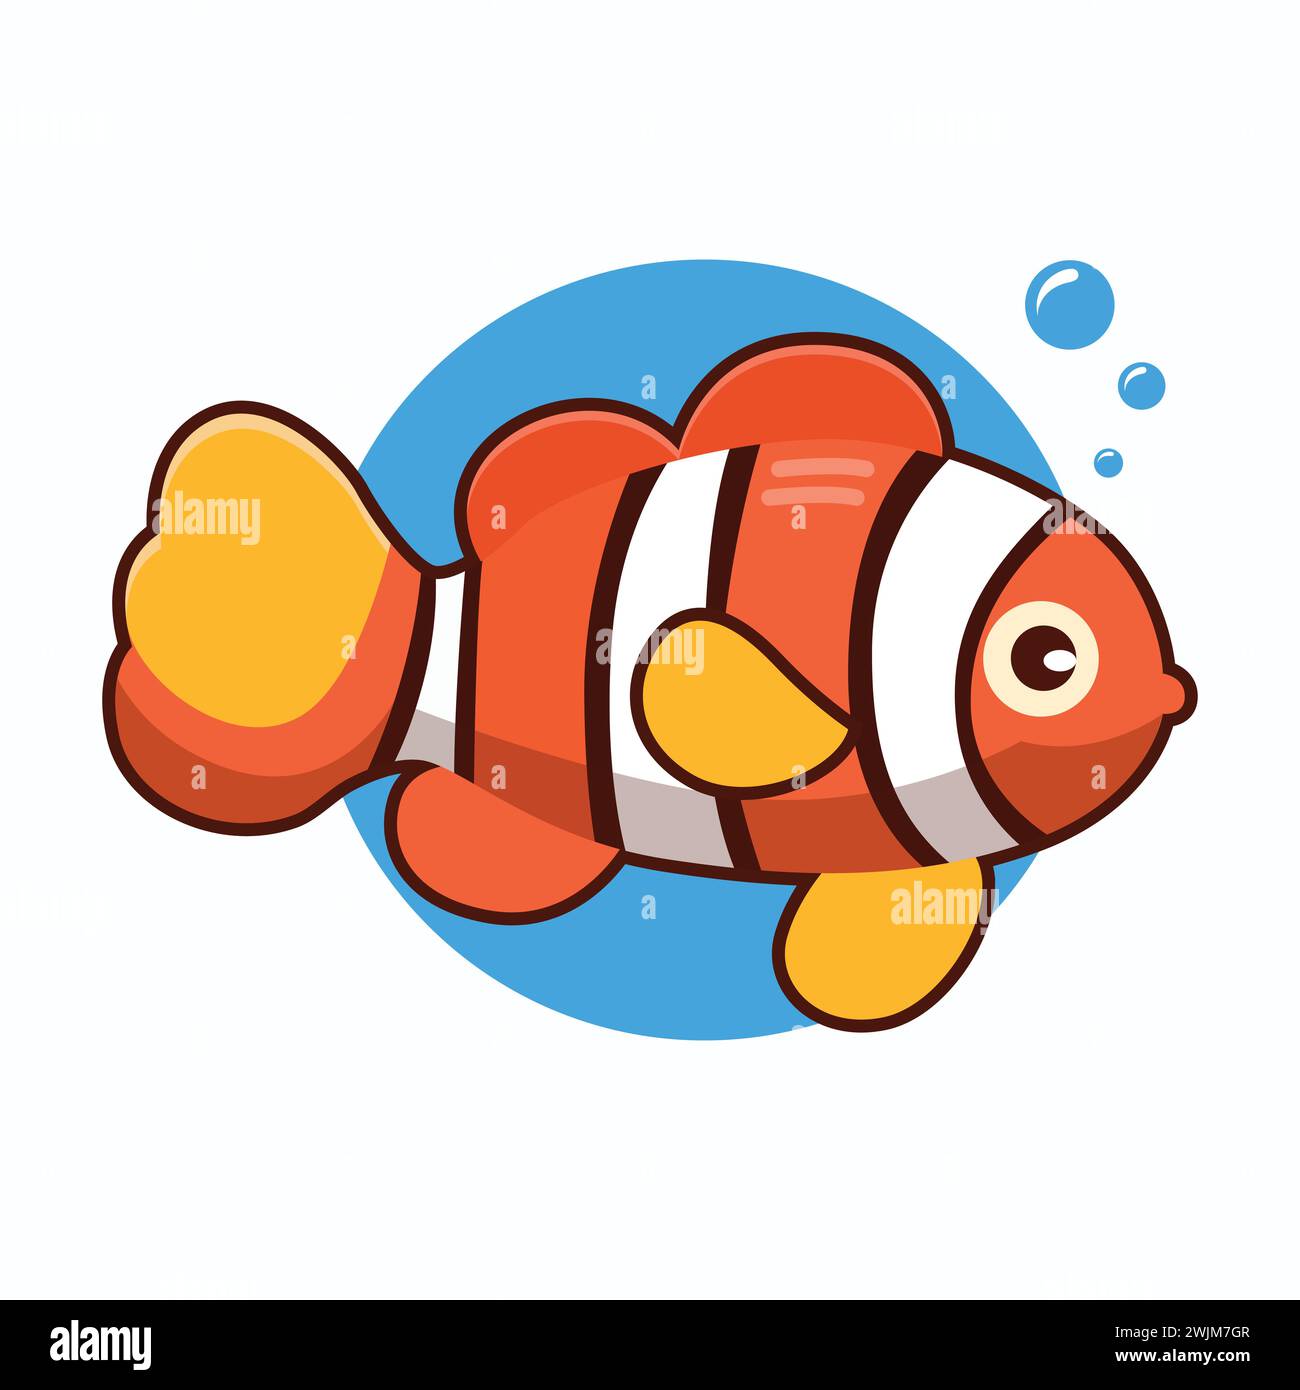 Clown fish flat style vector icon illustration. Isolated Reef fish with yellow, orange, and white color. Sea animal cartoon character sticker design. Stock Vector